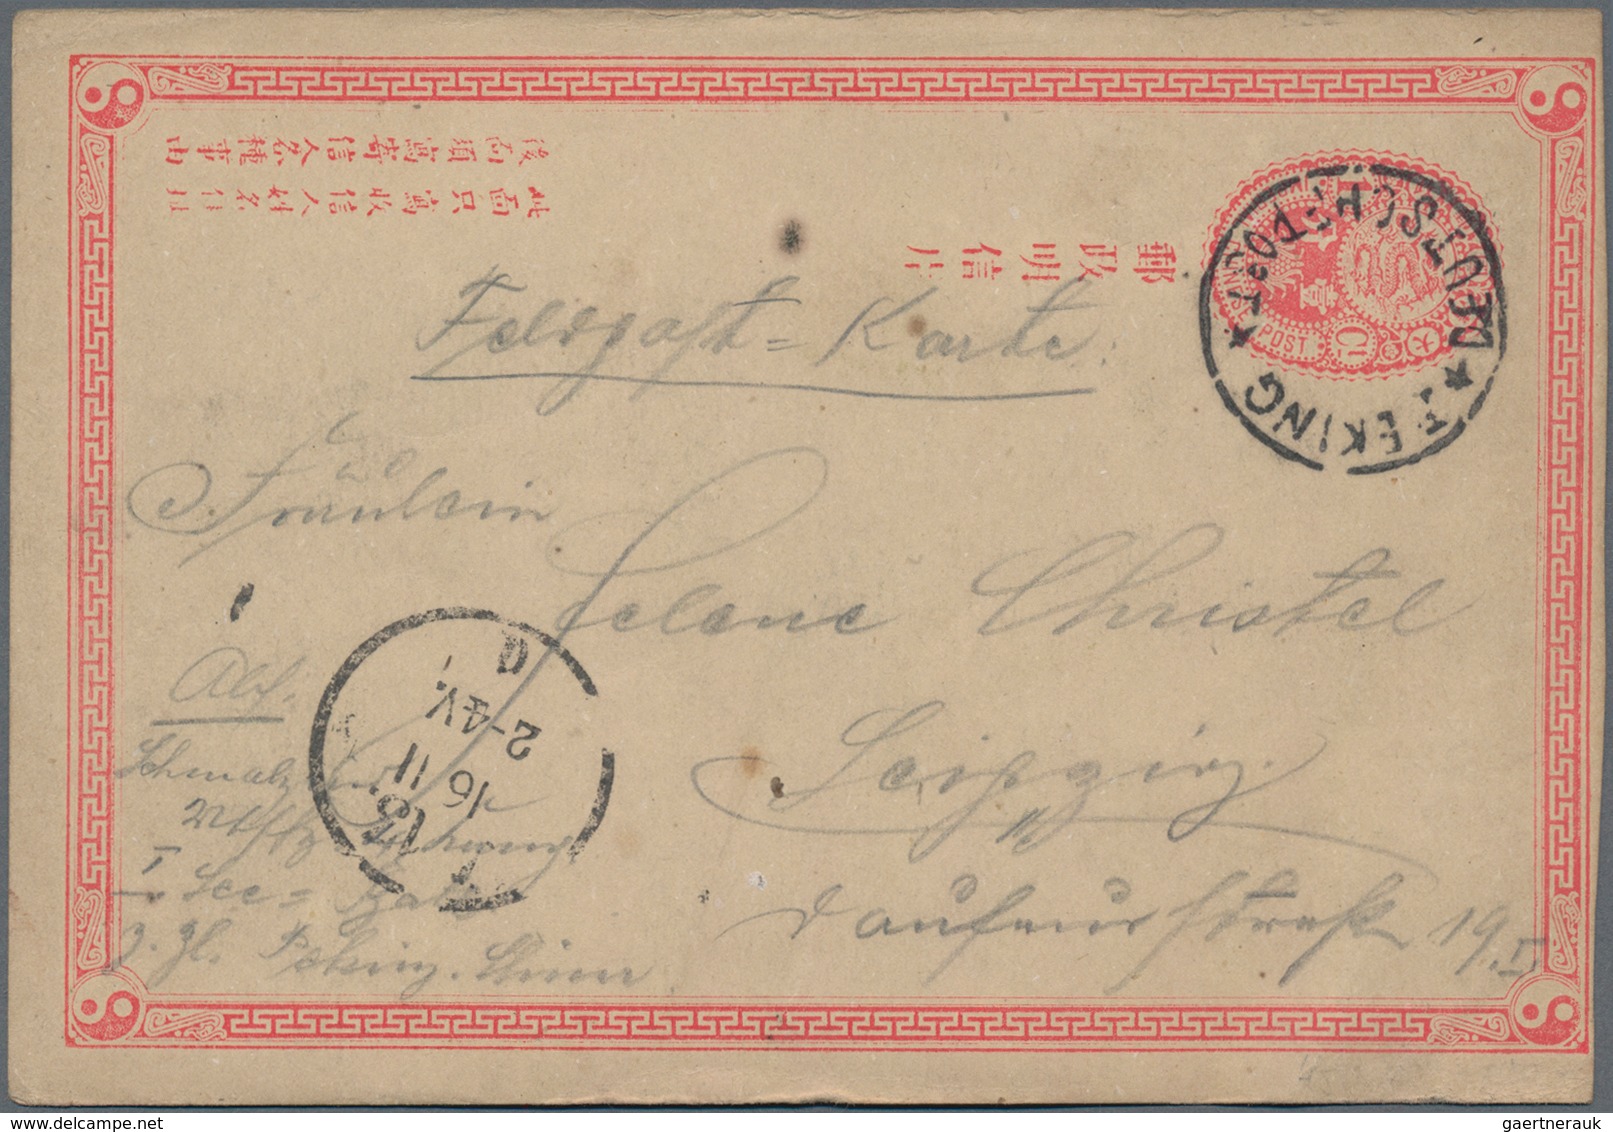 China - Ganzsachen: 1897, Card CIP 1 C. (2) Used German Military Mail In 1900 To Germany: "PEKING 12 - Cartes Postales